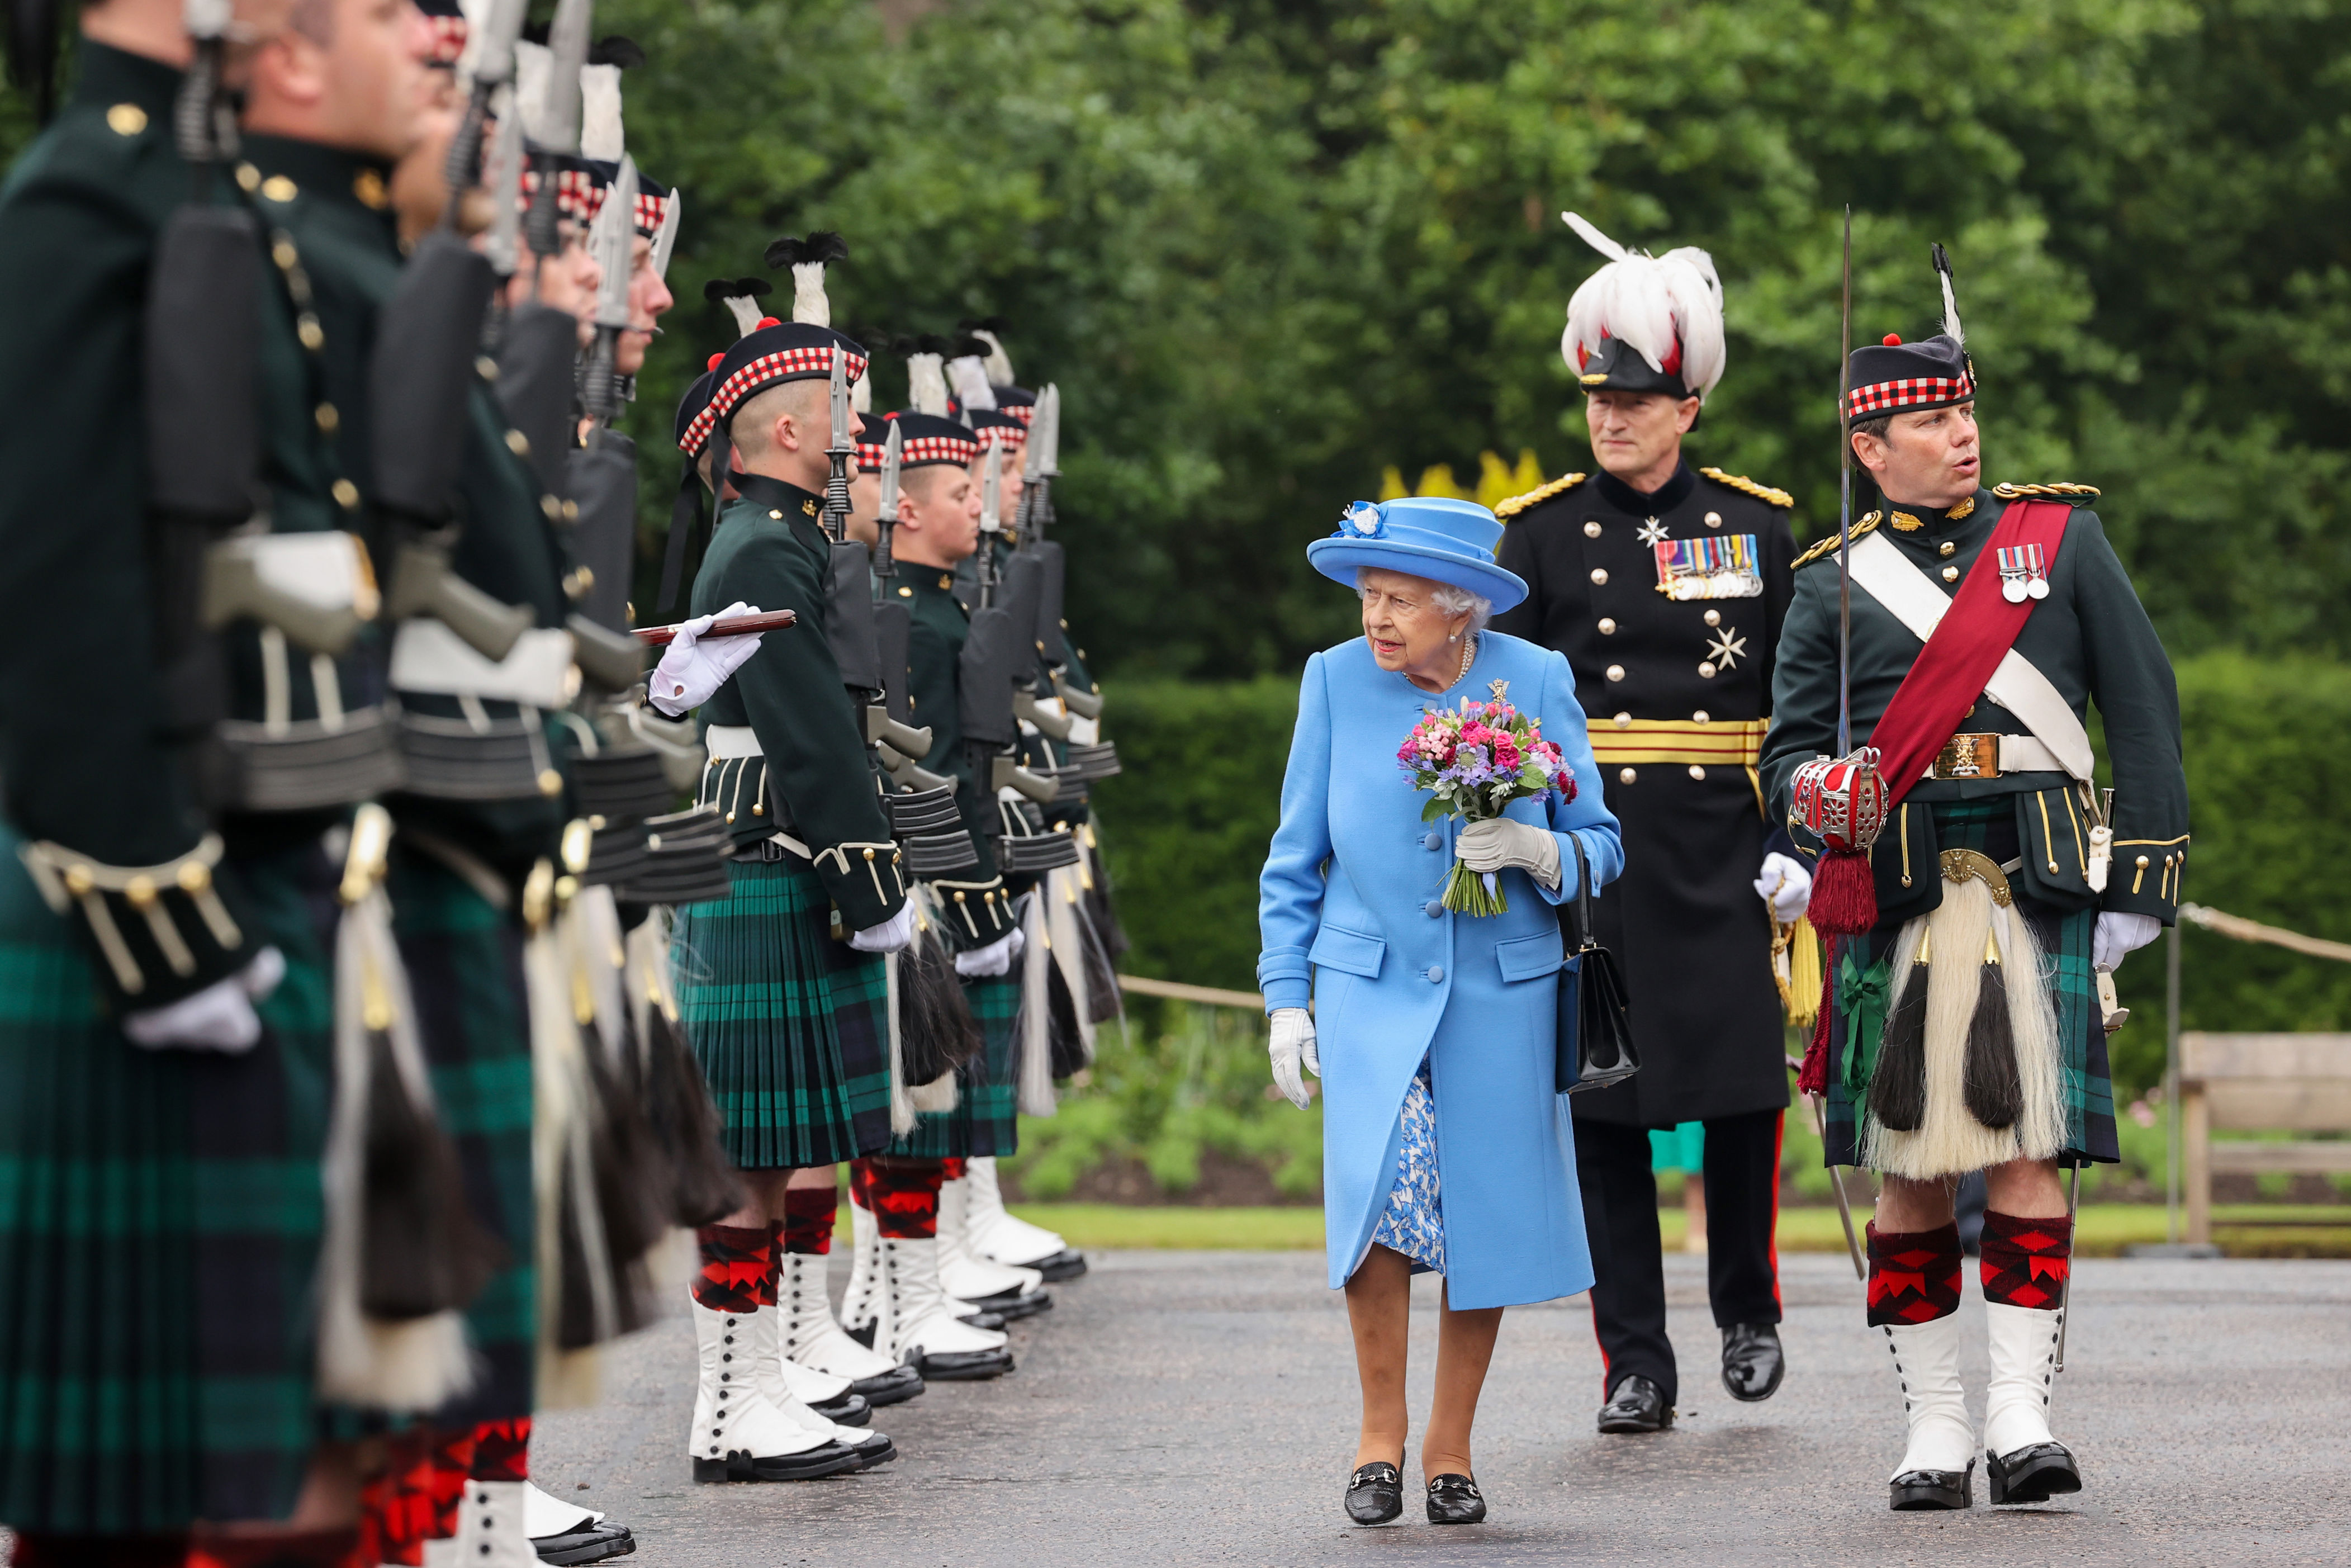 <p>Queen Elizabeth II and the governor of Edinburgh Castle, Major General Alastair Bruce of Crionaich, visited Scotland's Palace of Holyrood house ahead of the ancient "Ceremony of the Keys," during which the keys of the city of Edinburgh are given to the sovereign, on June 28, 2021, during the monarch's Royal Week visit to Scotland.</p>